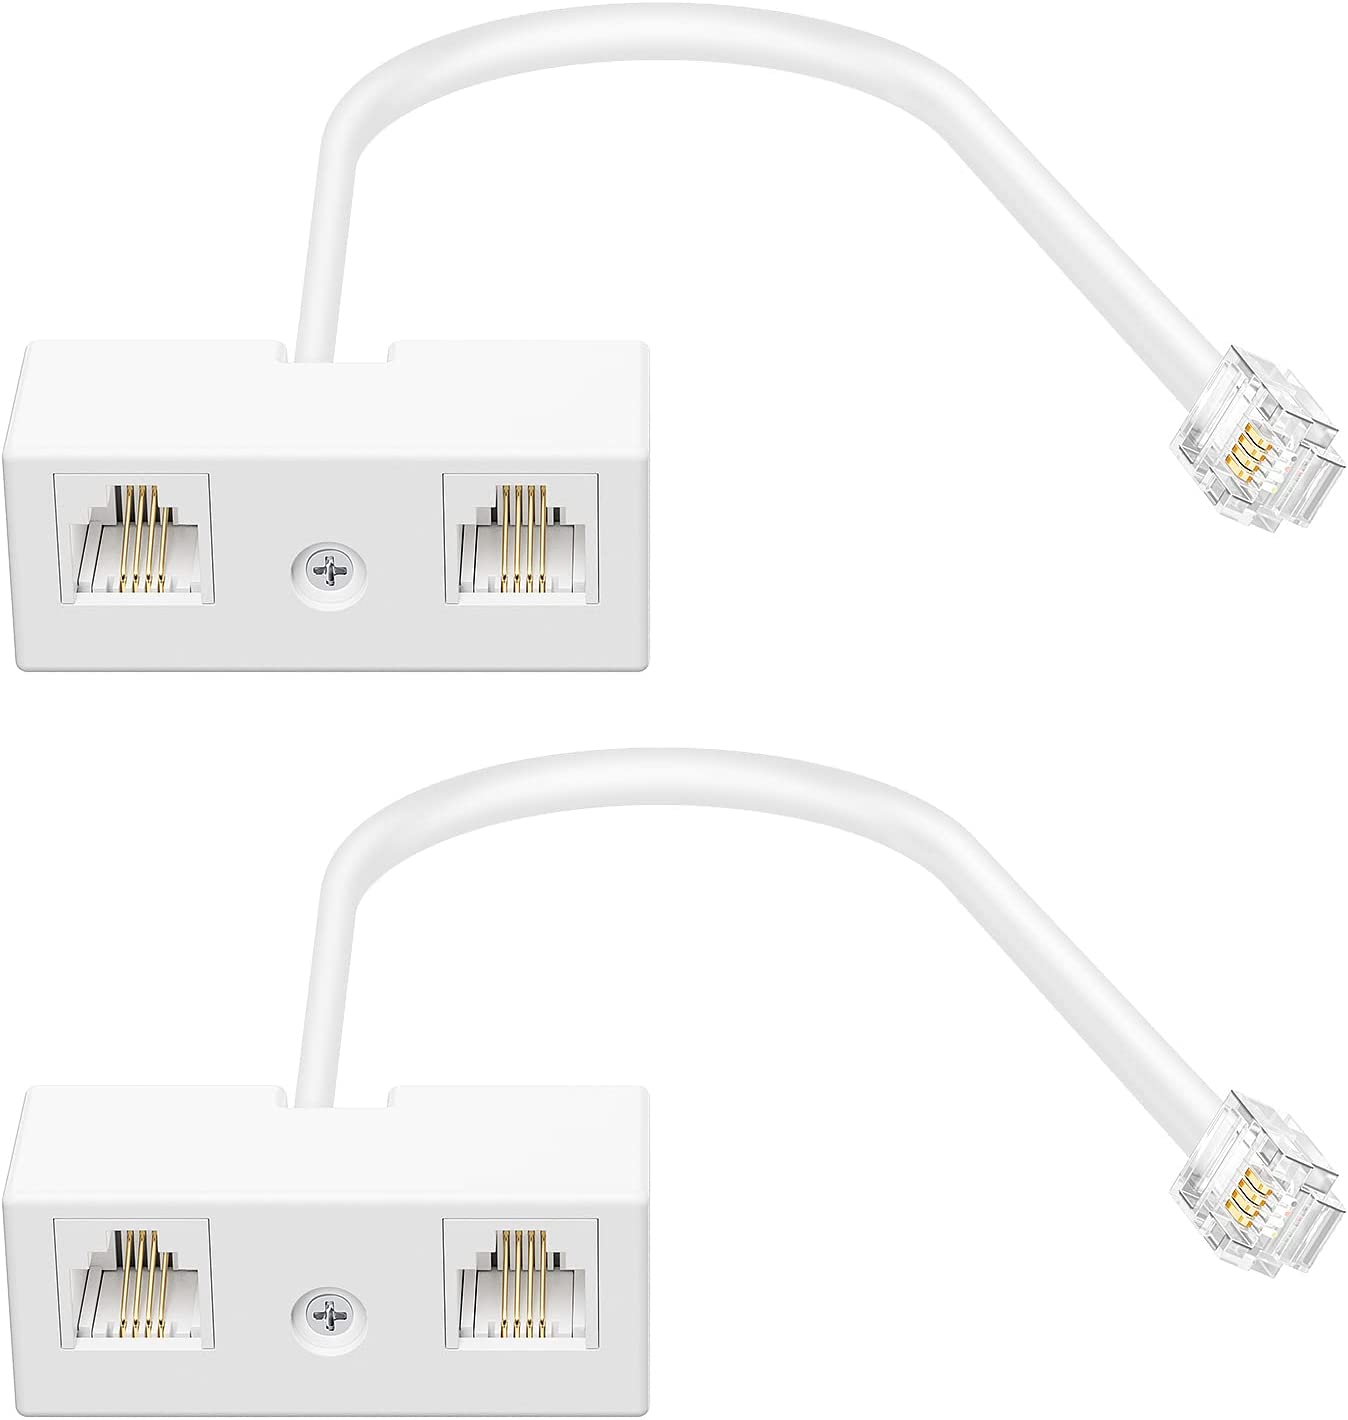 Two Way RJ11 6P4C 1 Male to 2 Female Converter Adaptor 2 Pack Telephone Splitter RJ11 Telephone Wall Plate and Separator for Landline 